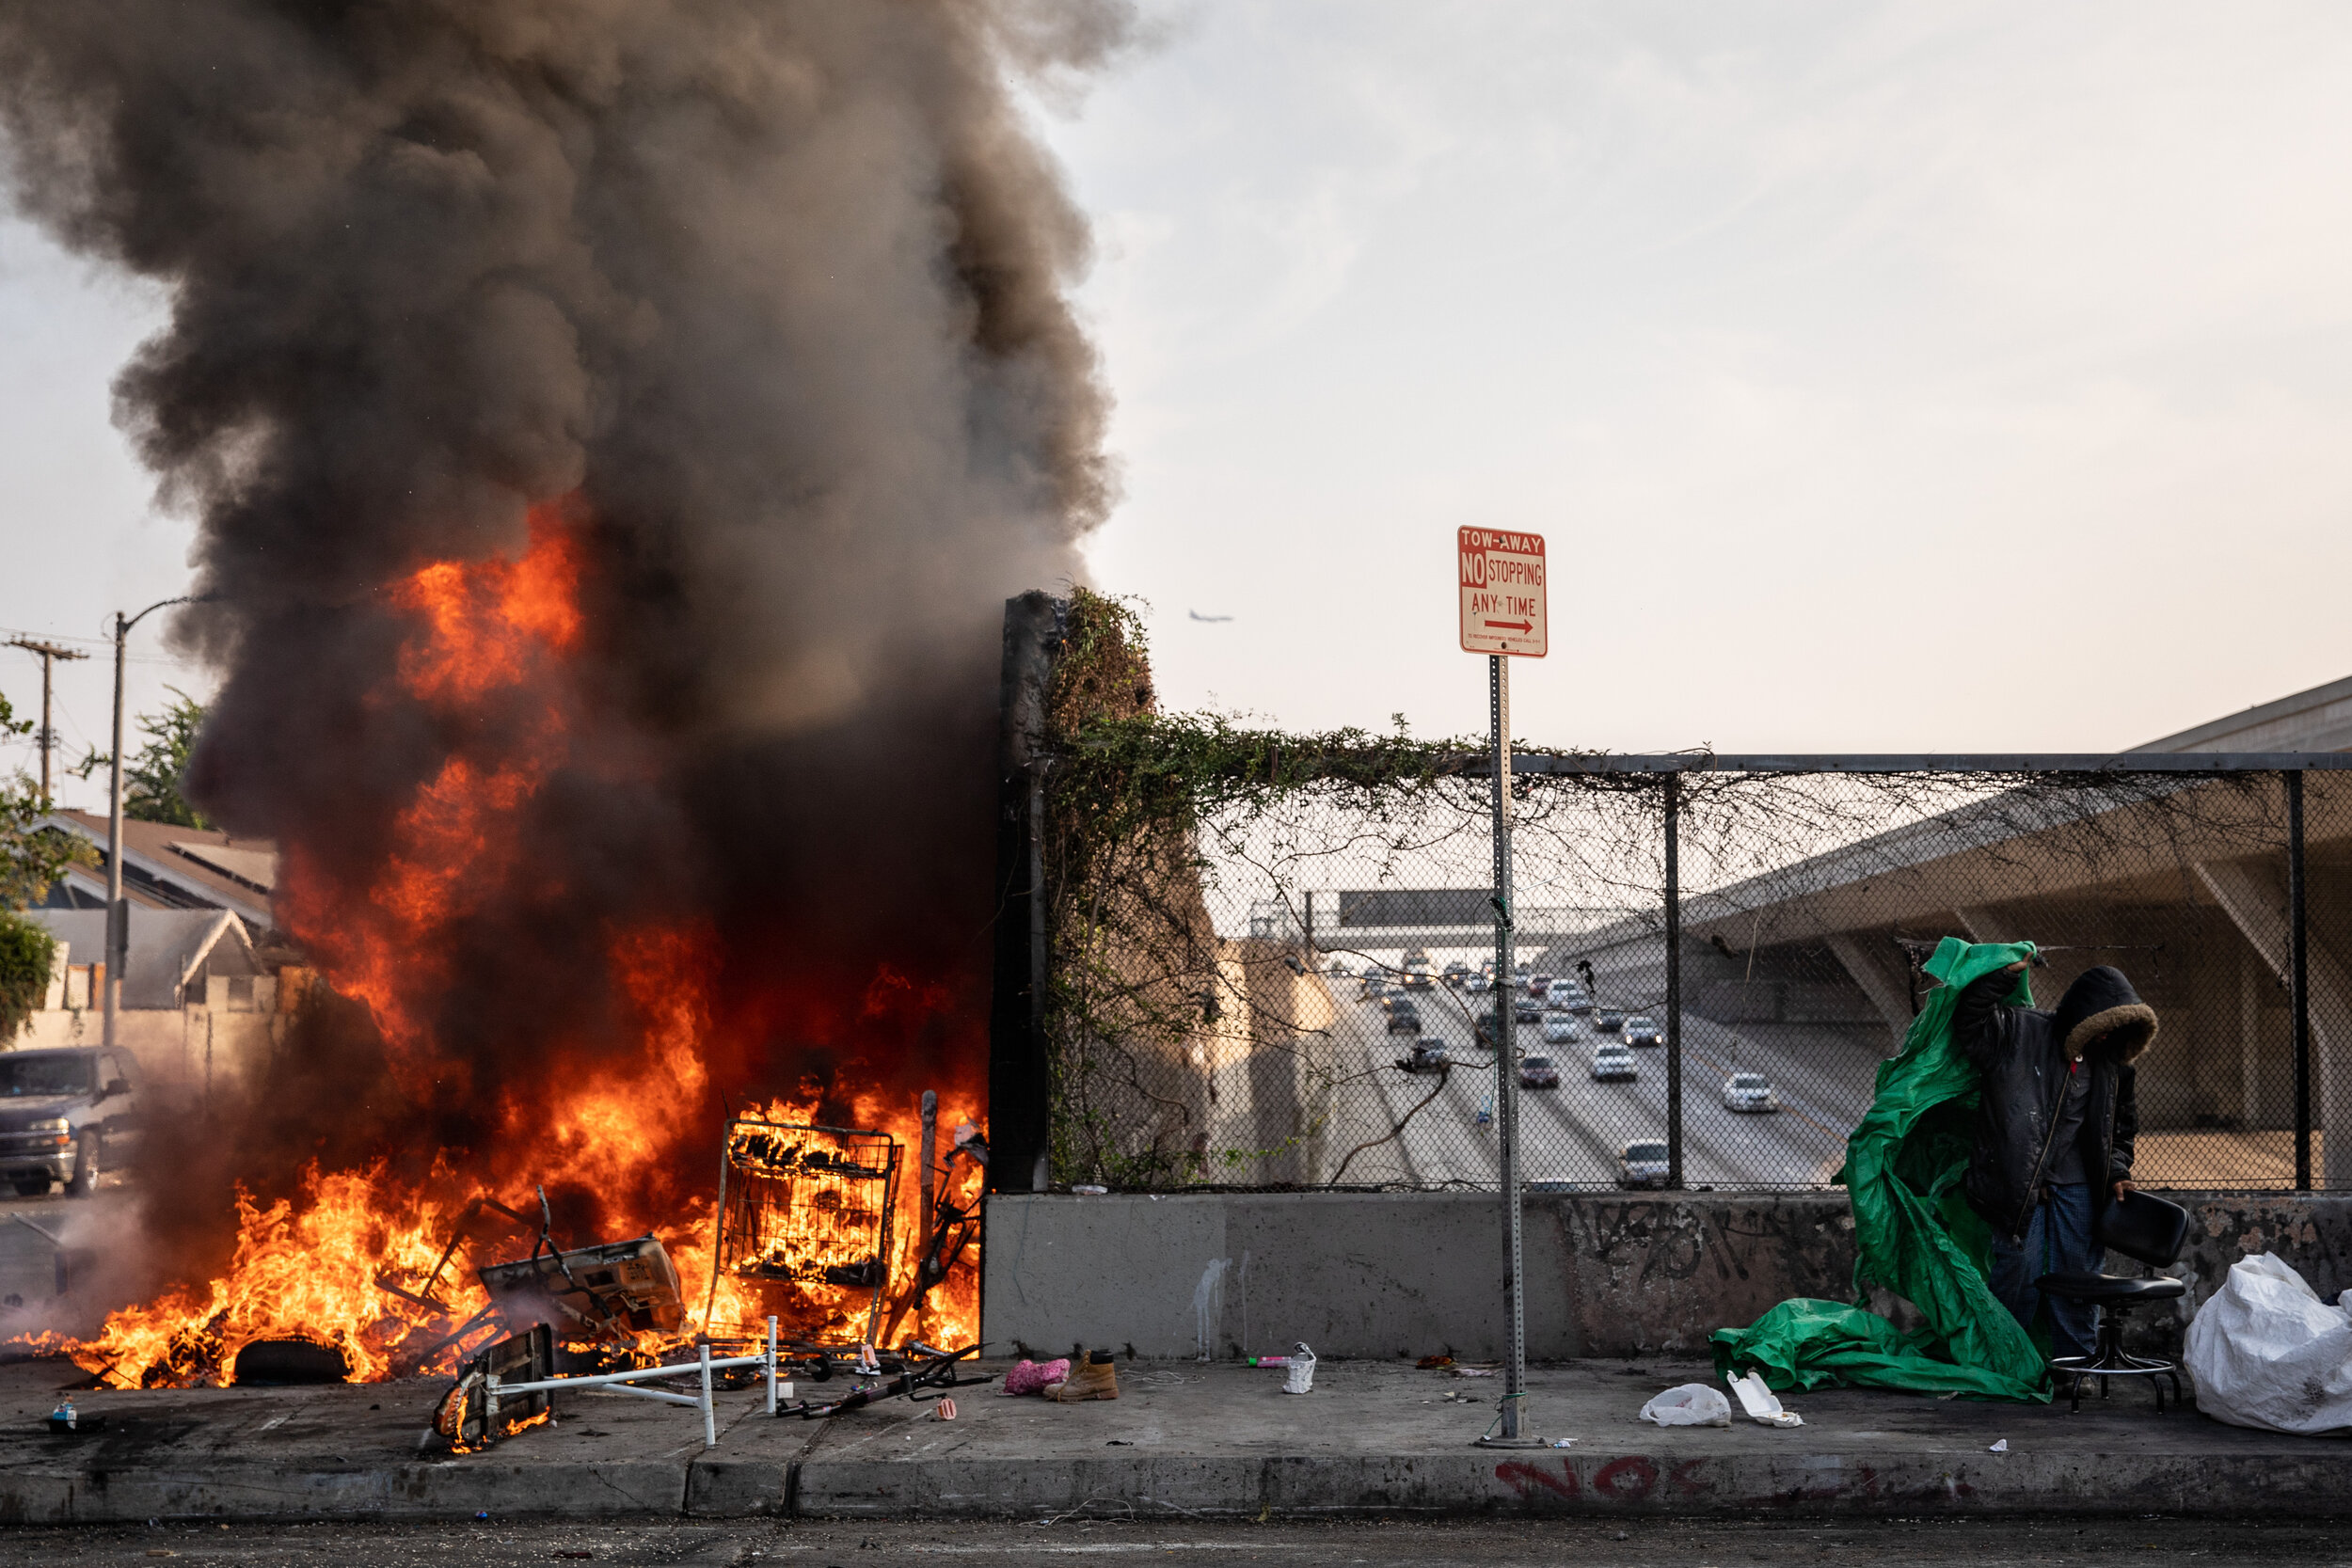  “Homeless fire” A homeless man is forced to move from his encampment at the corner of S Grand Avenue and W 54th Street, above the 110 Freeway, after another homeless encampment was engulfed in flames, in Los Angeles, CA,Thursday, Oct. 8, 2020. 